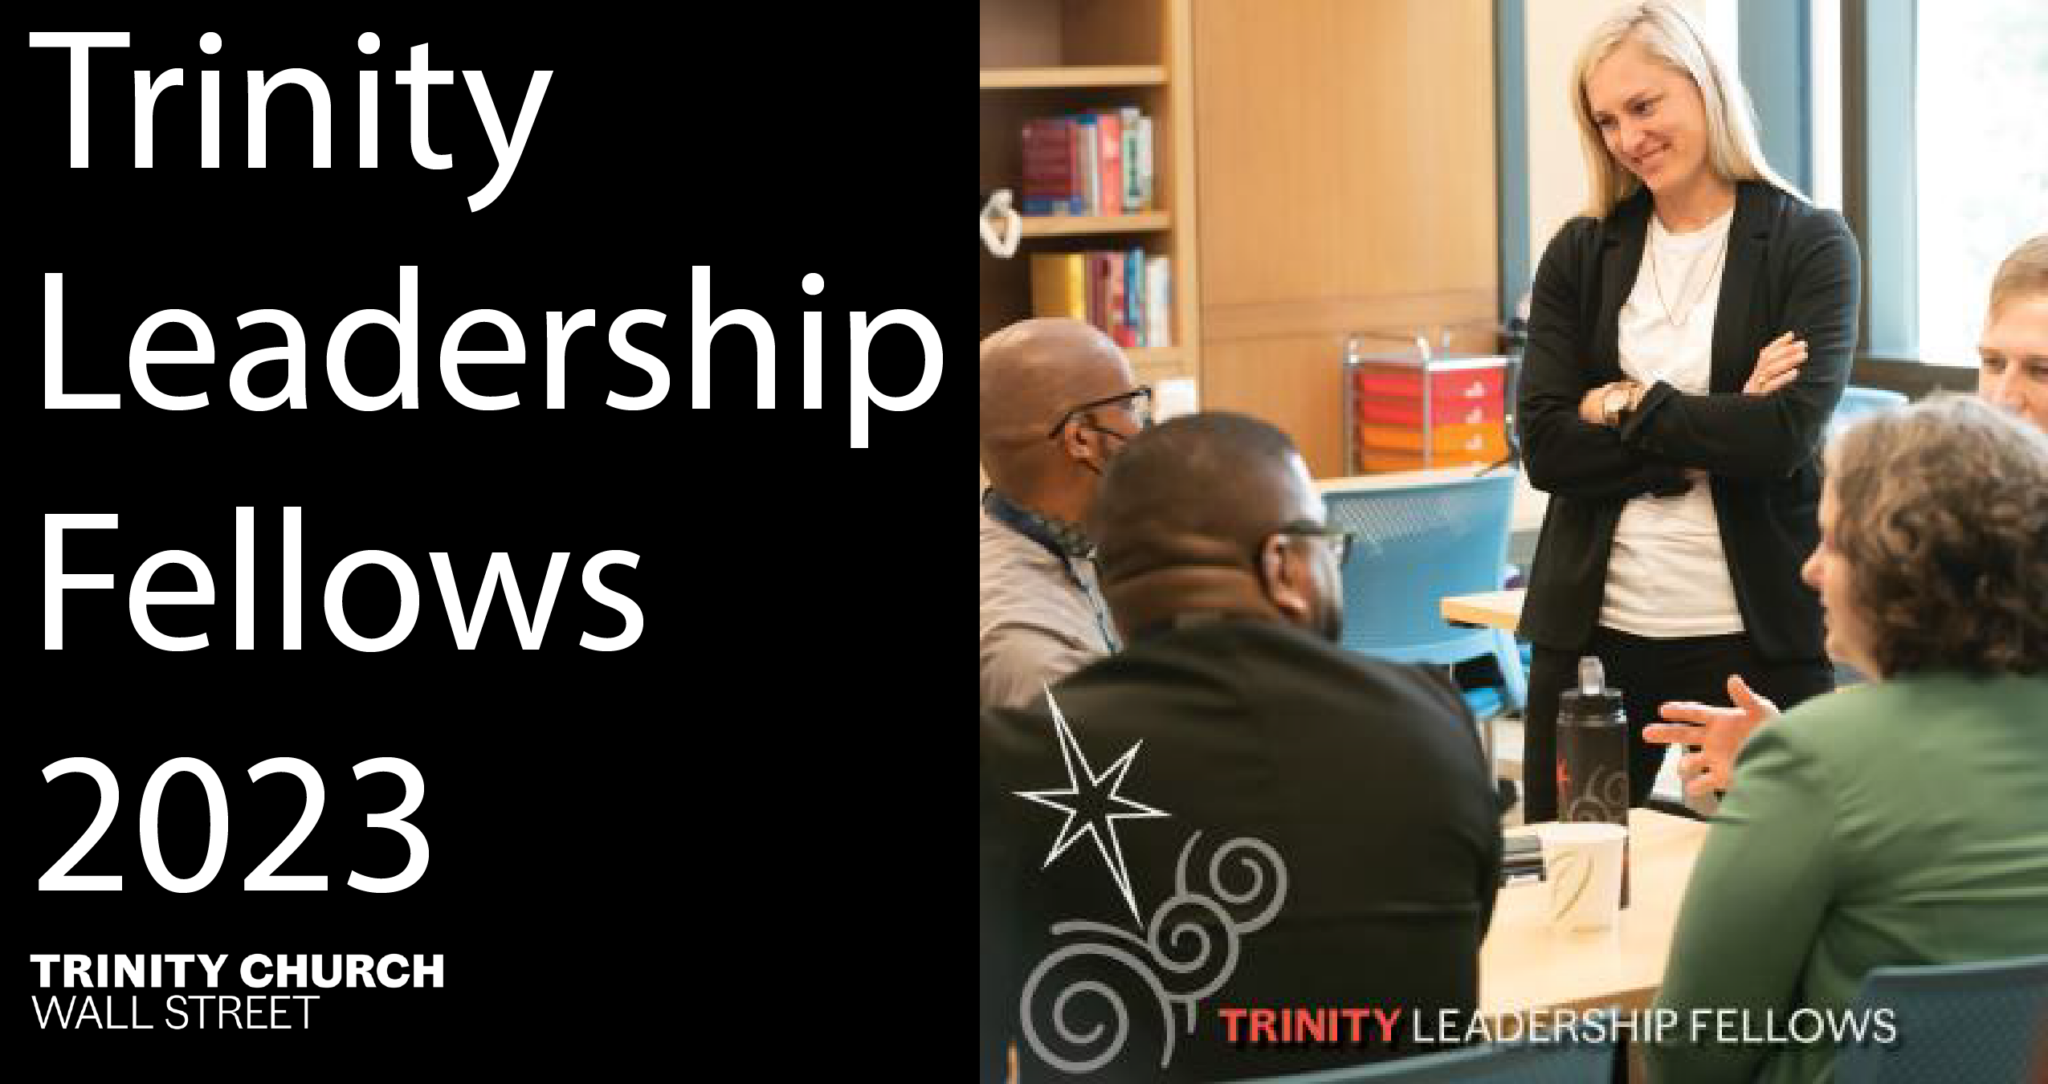 Trinity Leadership Fellows 2023 Youth Opportunities